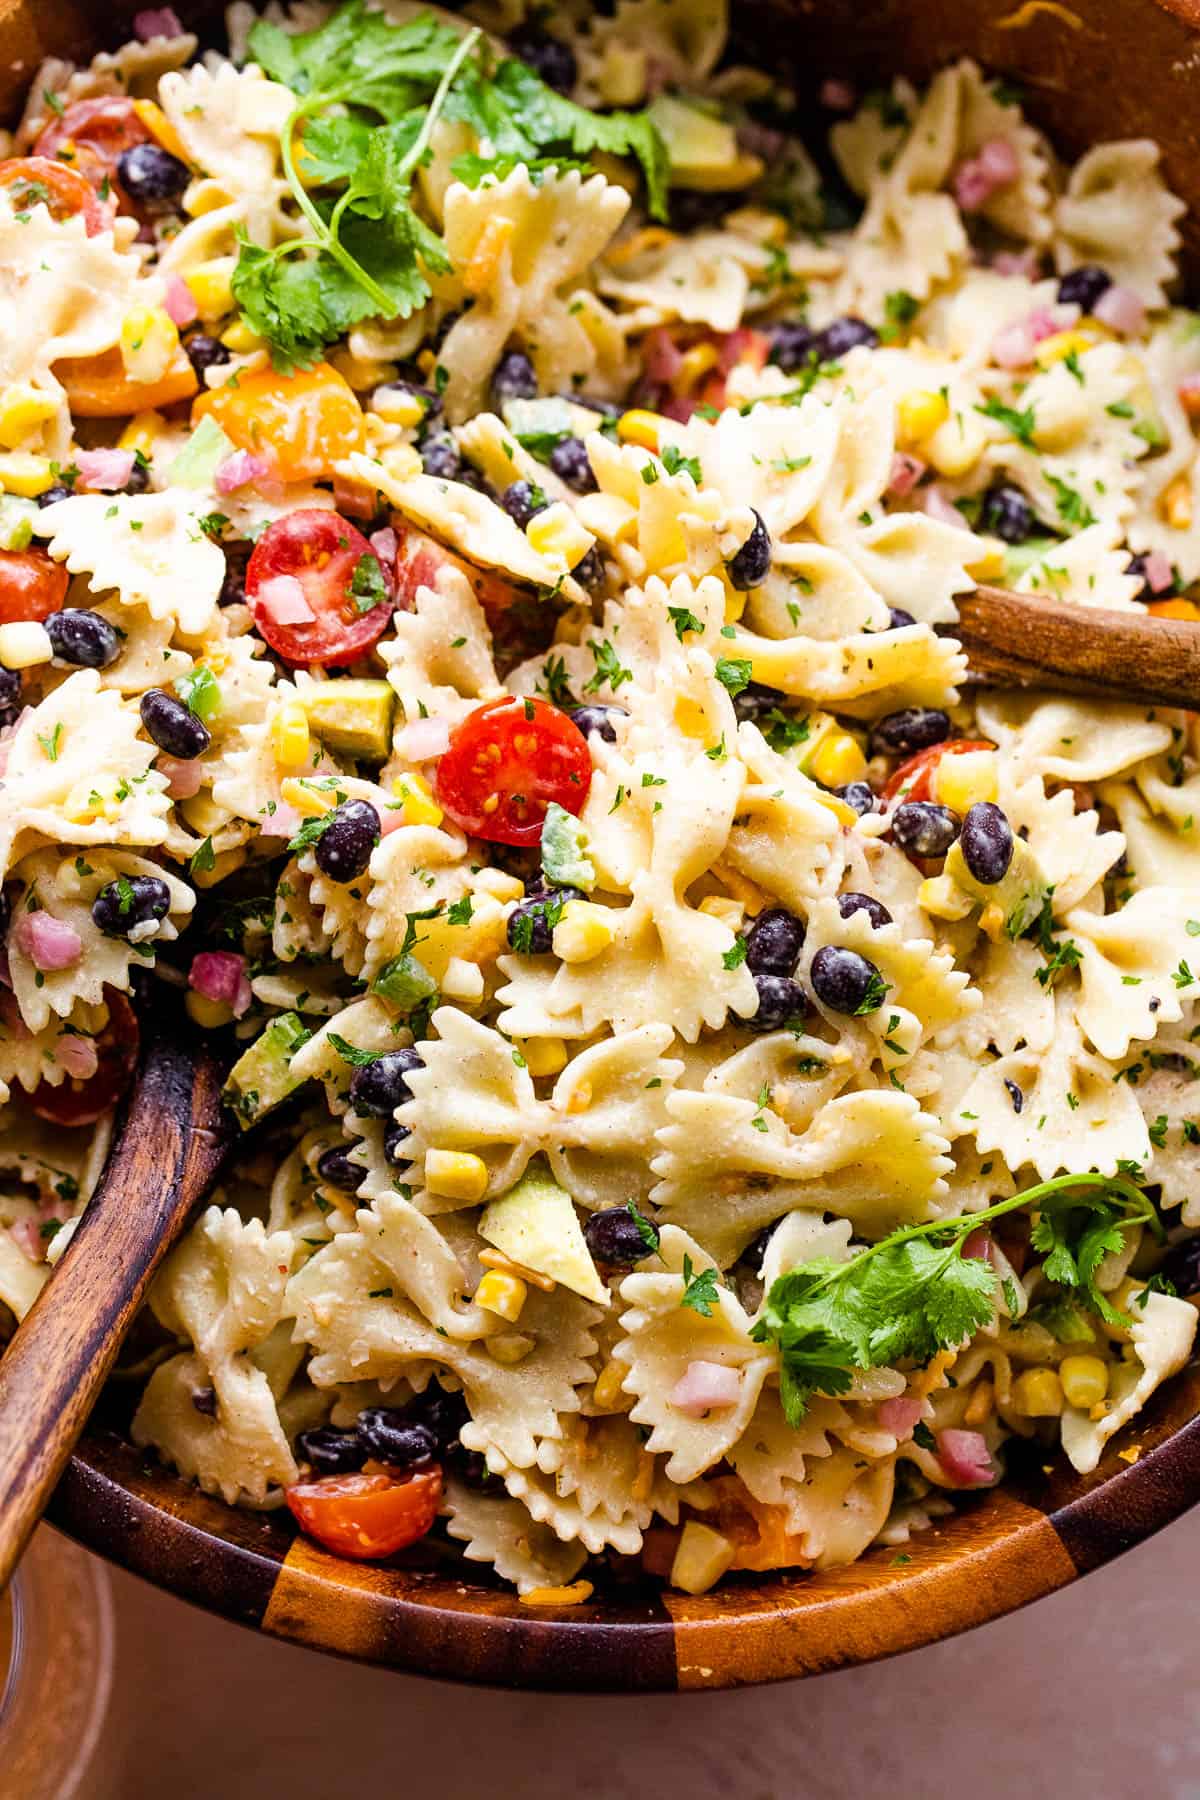 up close shot of fiesta pasta salad in a wooden salad bowl with two wooden spoons